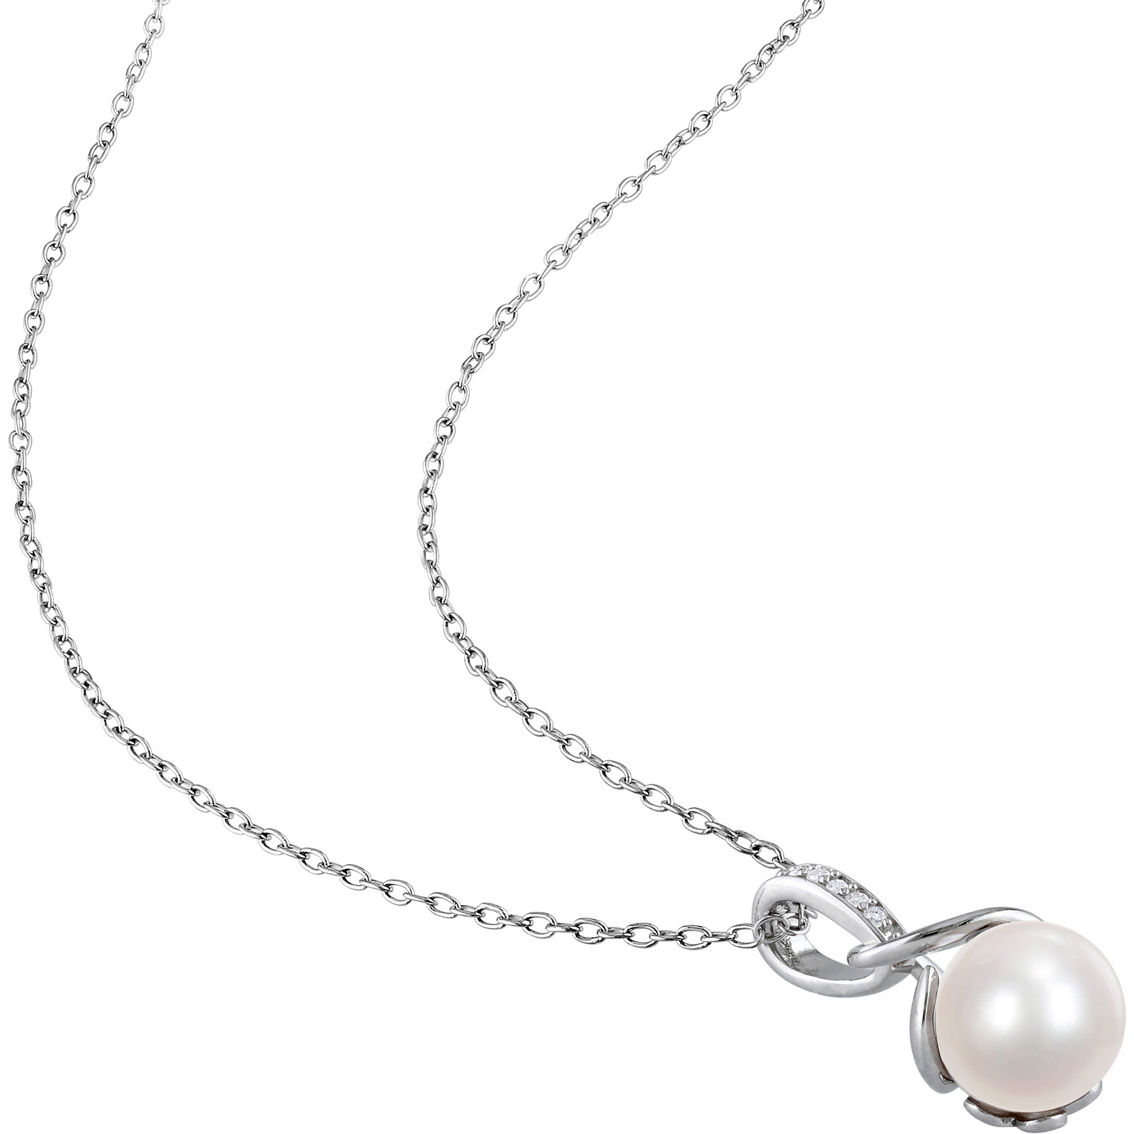 Sofia B. Cultured Freshwater Pearl Diamond Twist Necklace Earrings & Ring 3 pc. Set - Image 3 of 6